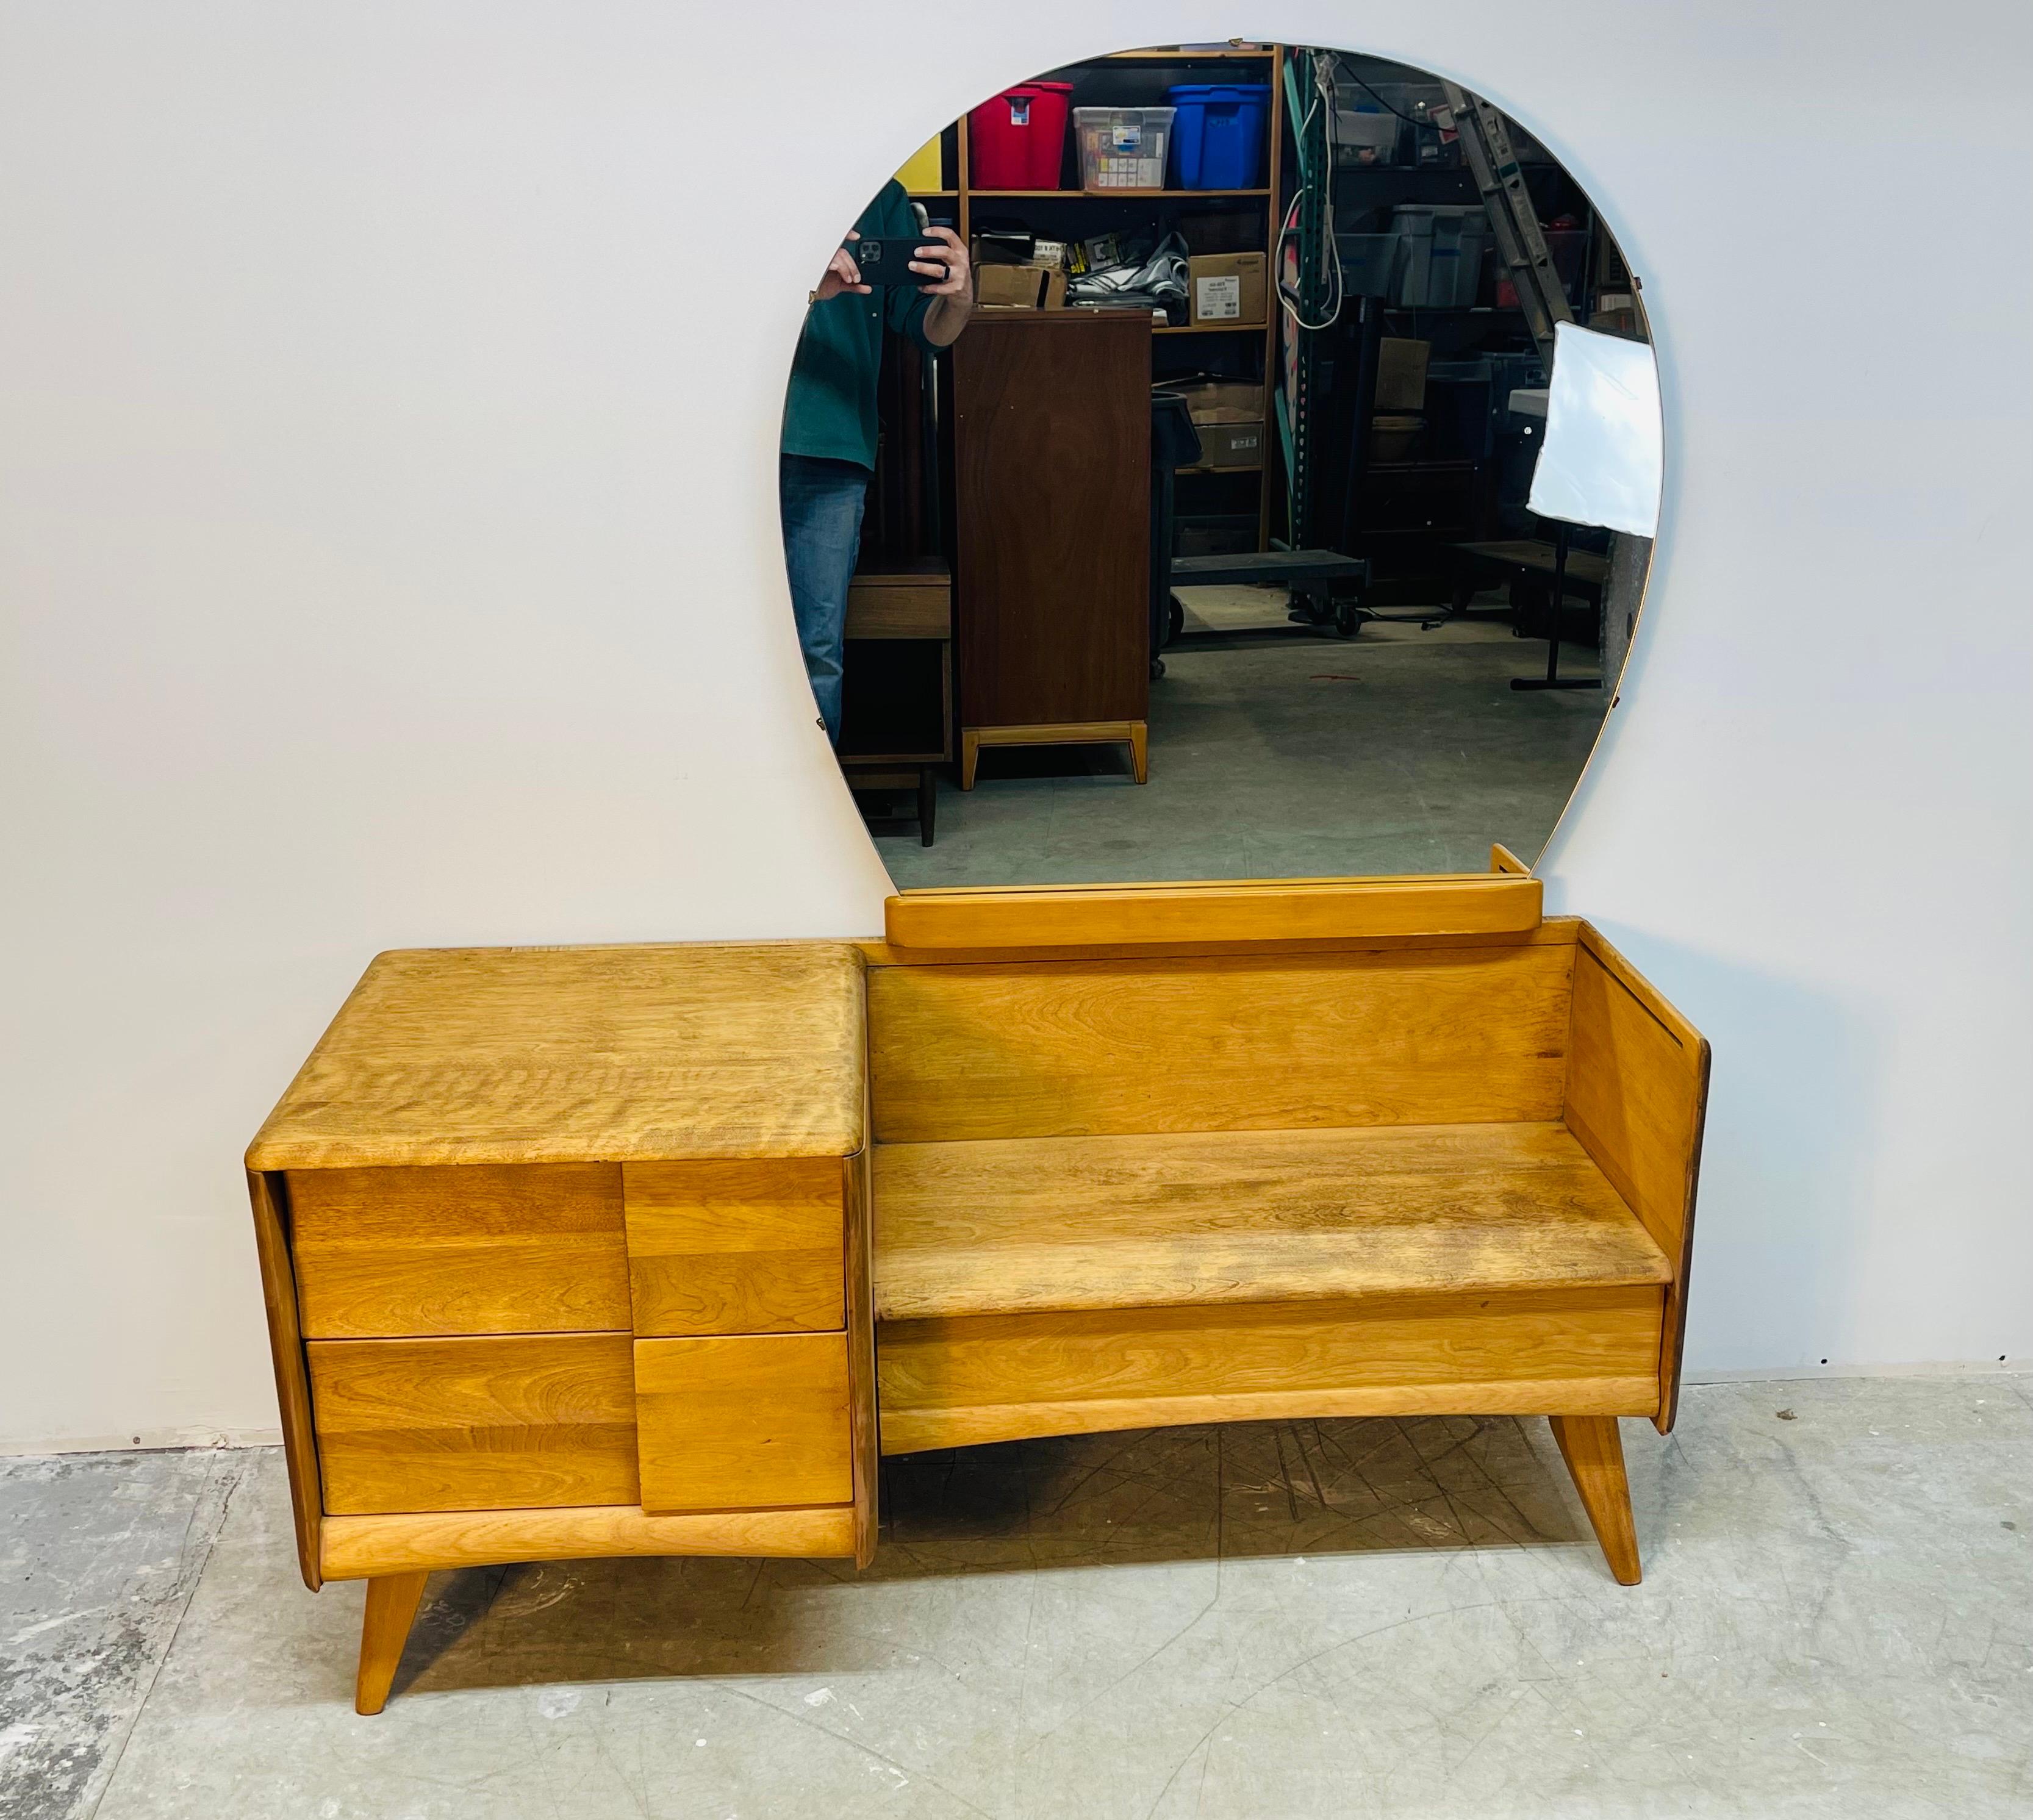 Vintage 1950s Heywood Wakefield maple wood vanity with round mirror. The vanity has been newly refinished and comes with three drawers for storage. The vanity is 23”H. With the mirror attached it is 55”H. And the seat height is 14.5”H. The mirror